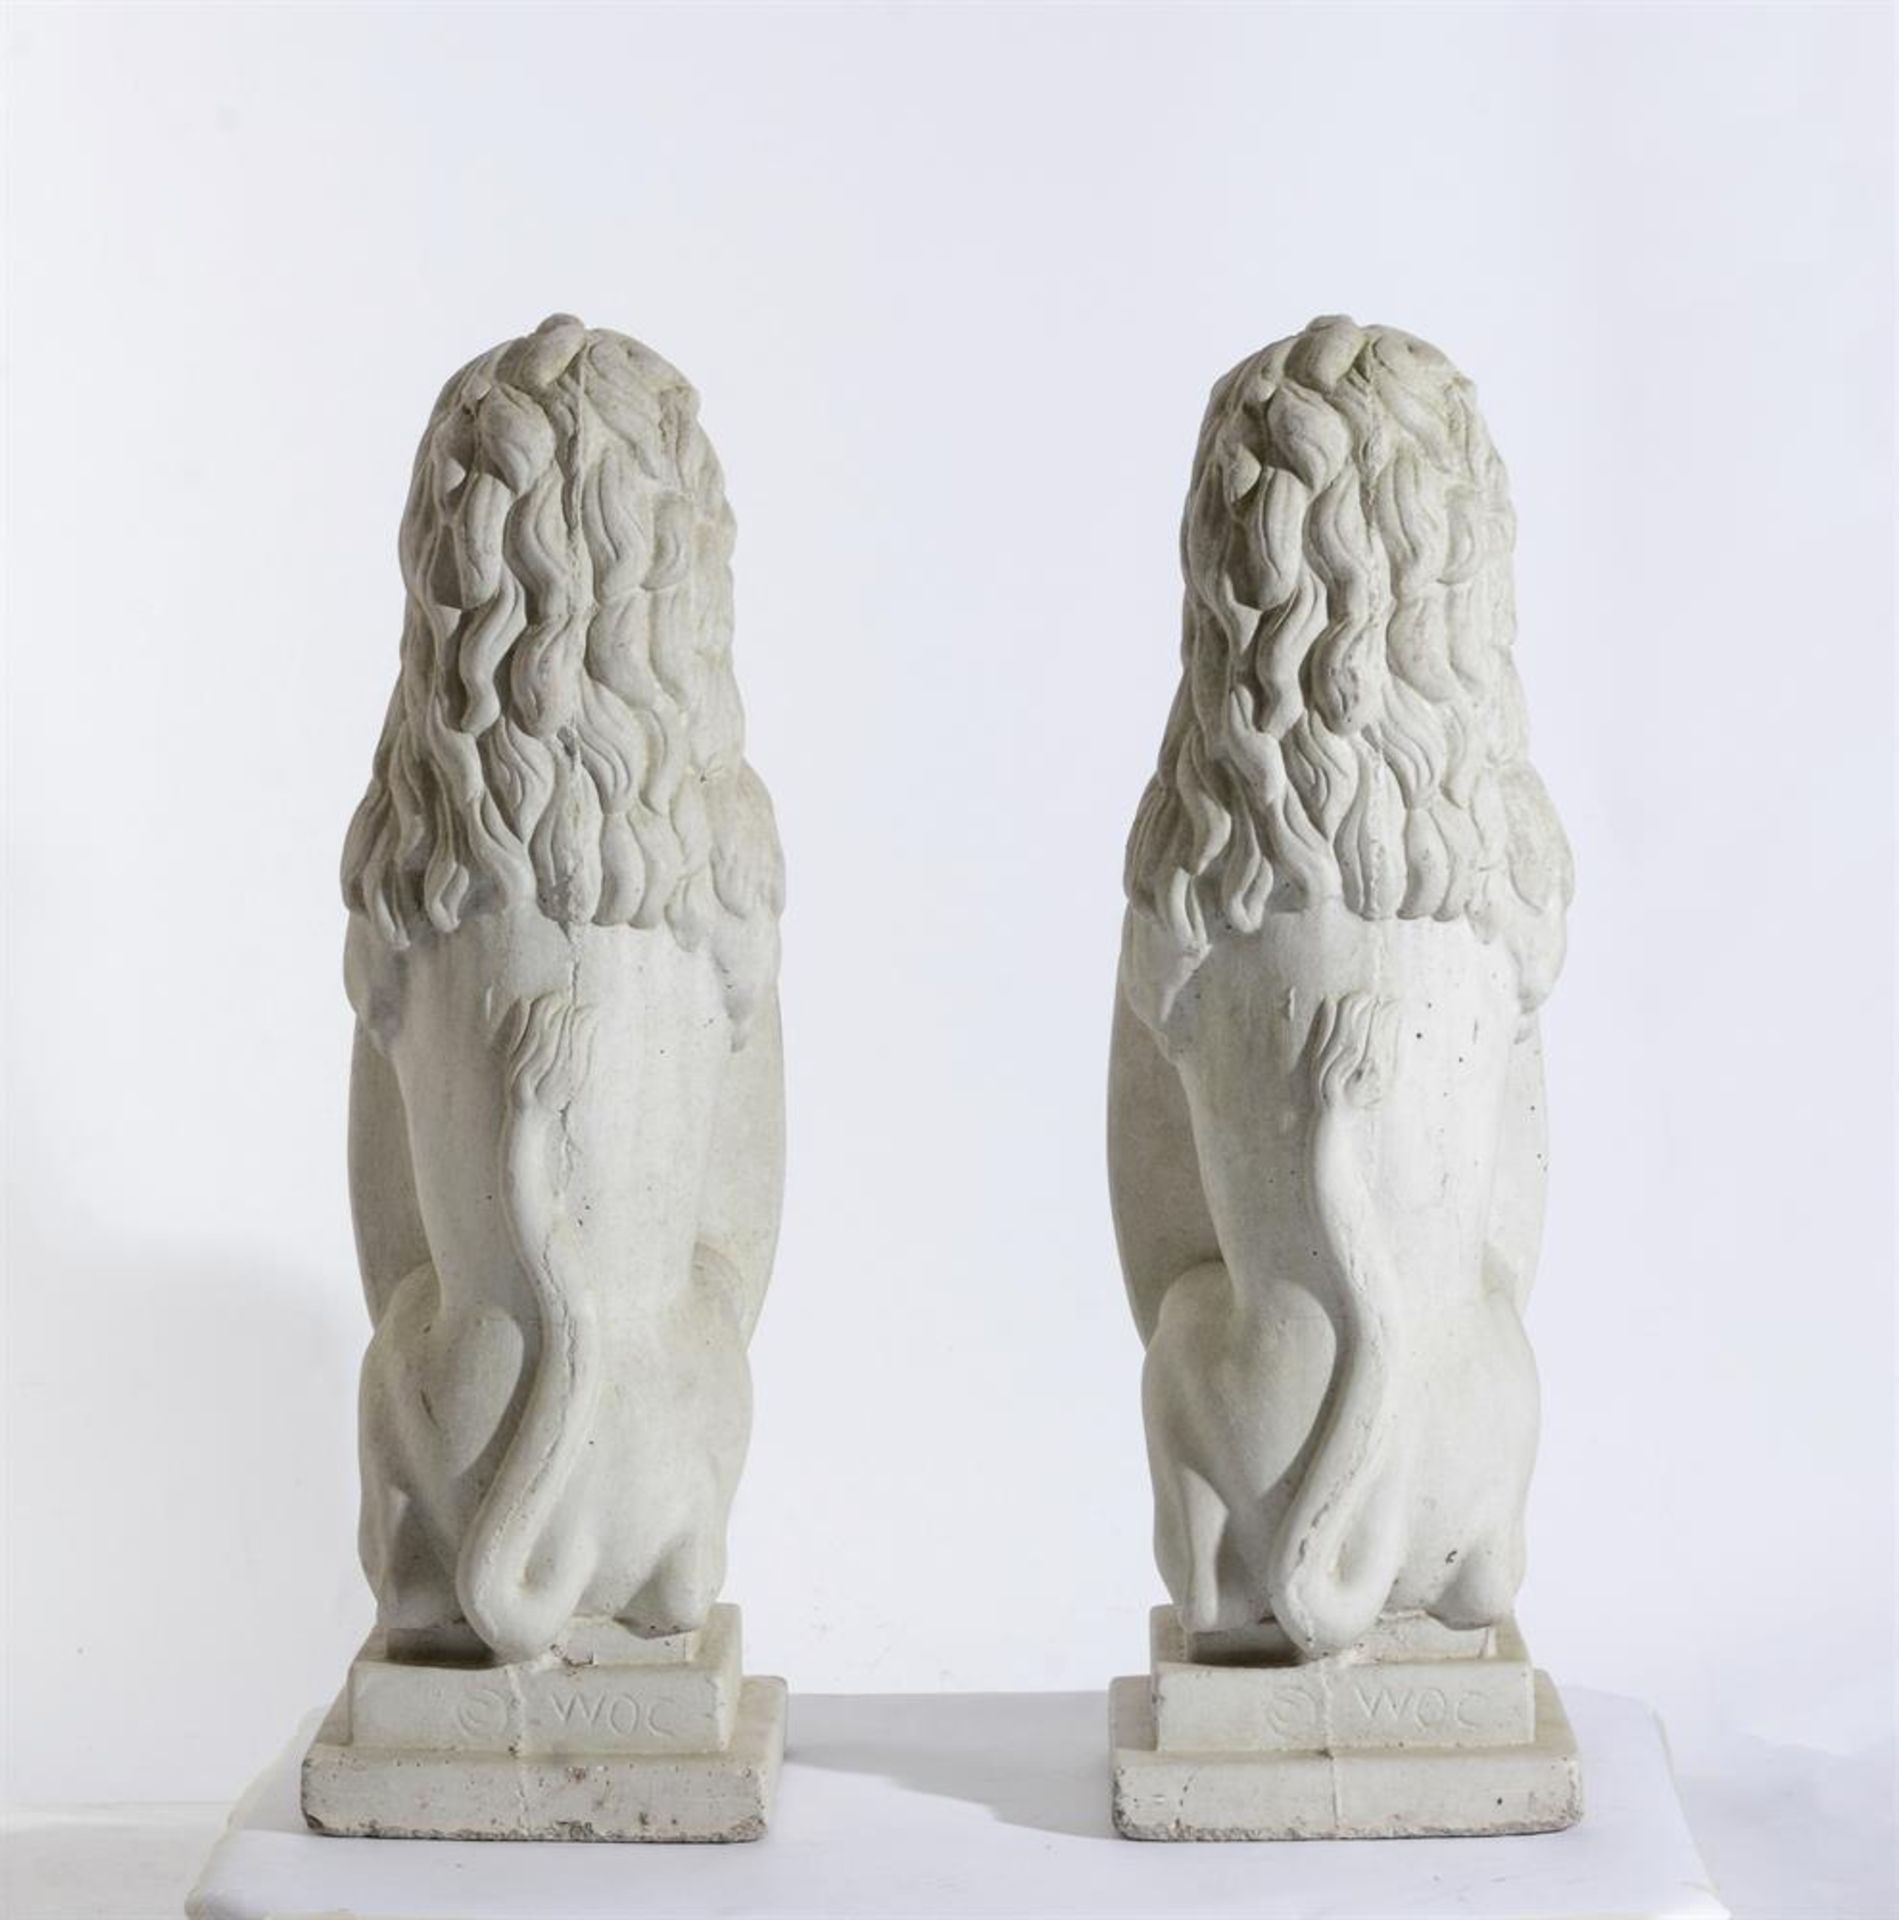 A PAIR OF WHITE PAINTED COMPOSITE STONE MODELS OF HERALDIC LIONS - Image 3 of 3